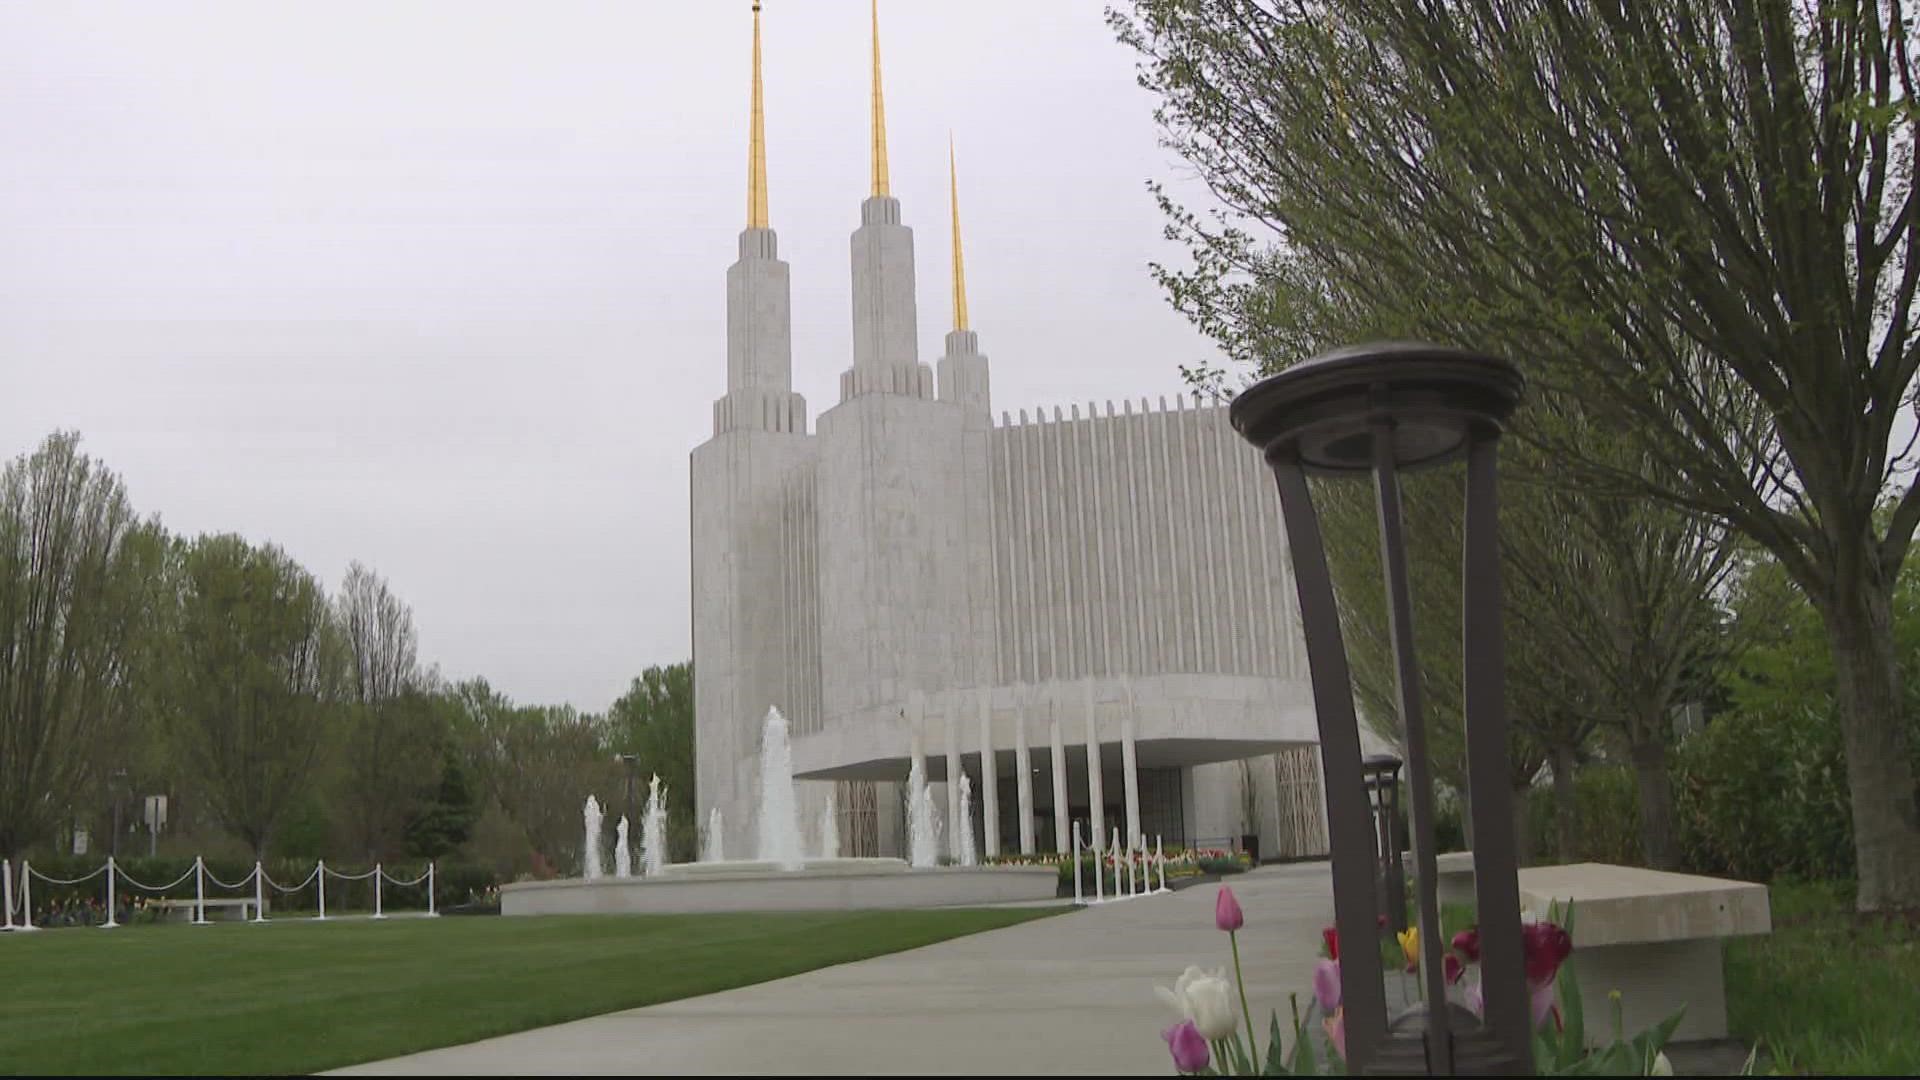 The temple is open for free, ticketed tours before it is rededicated. The space has never been open to the public before.